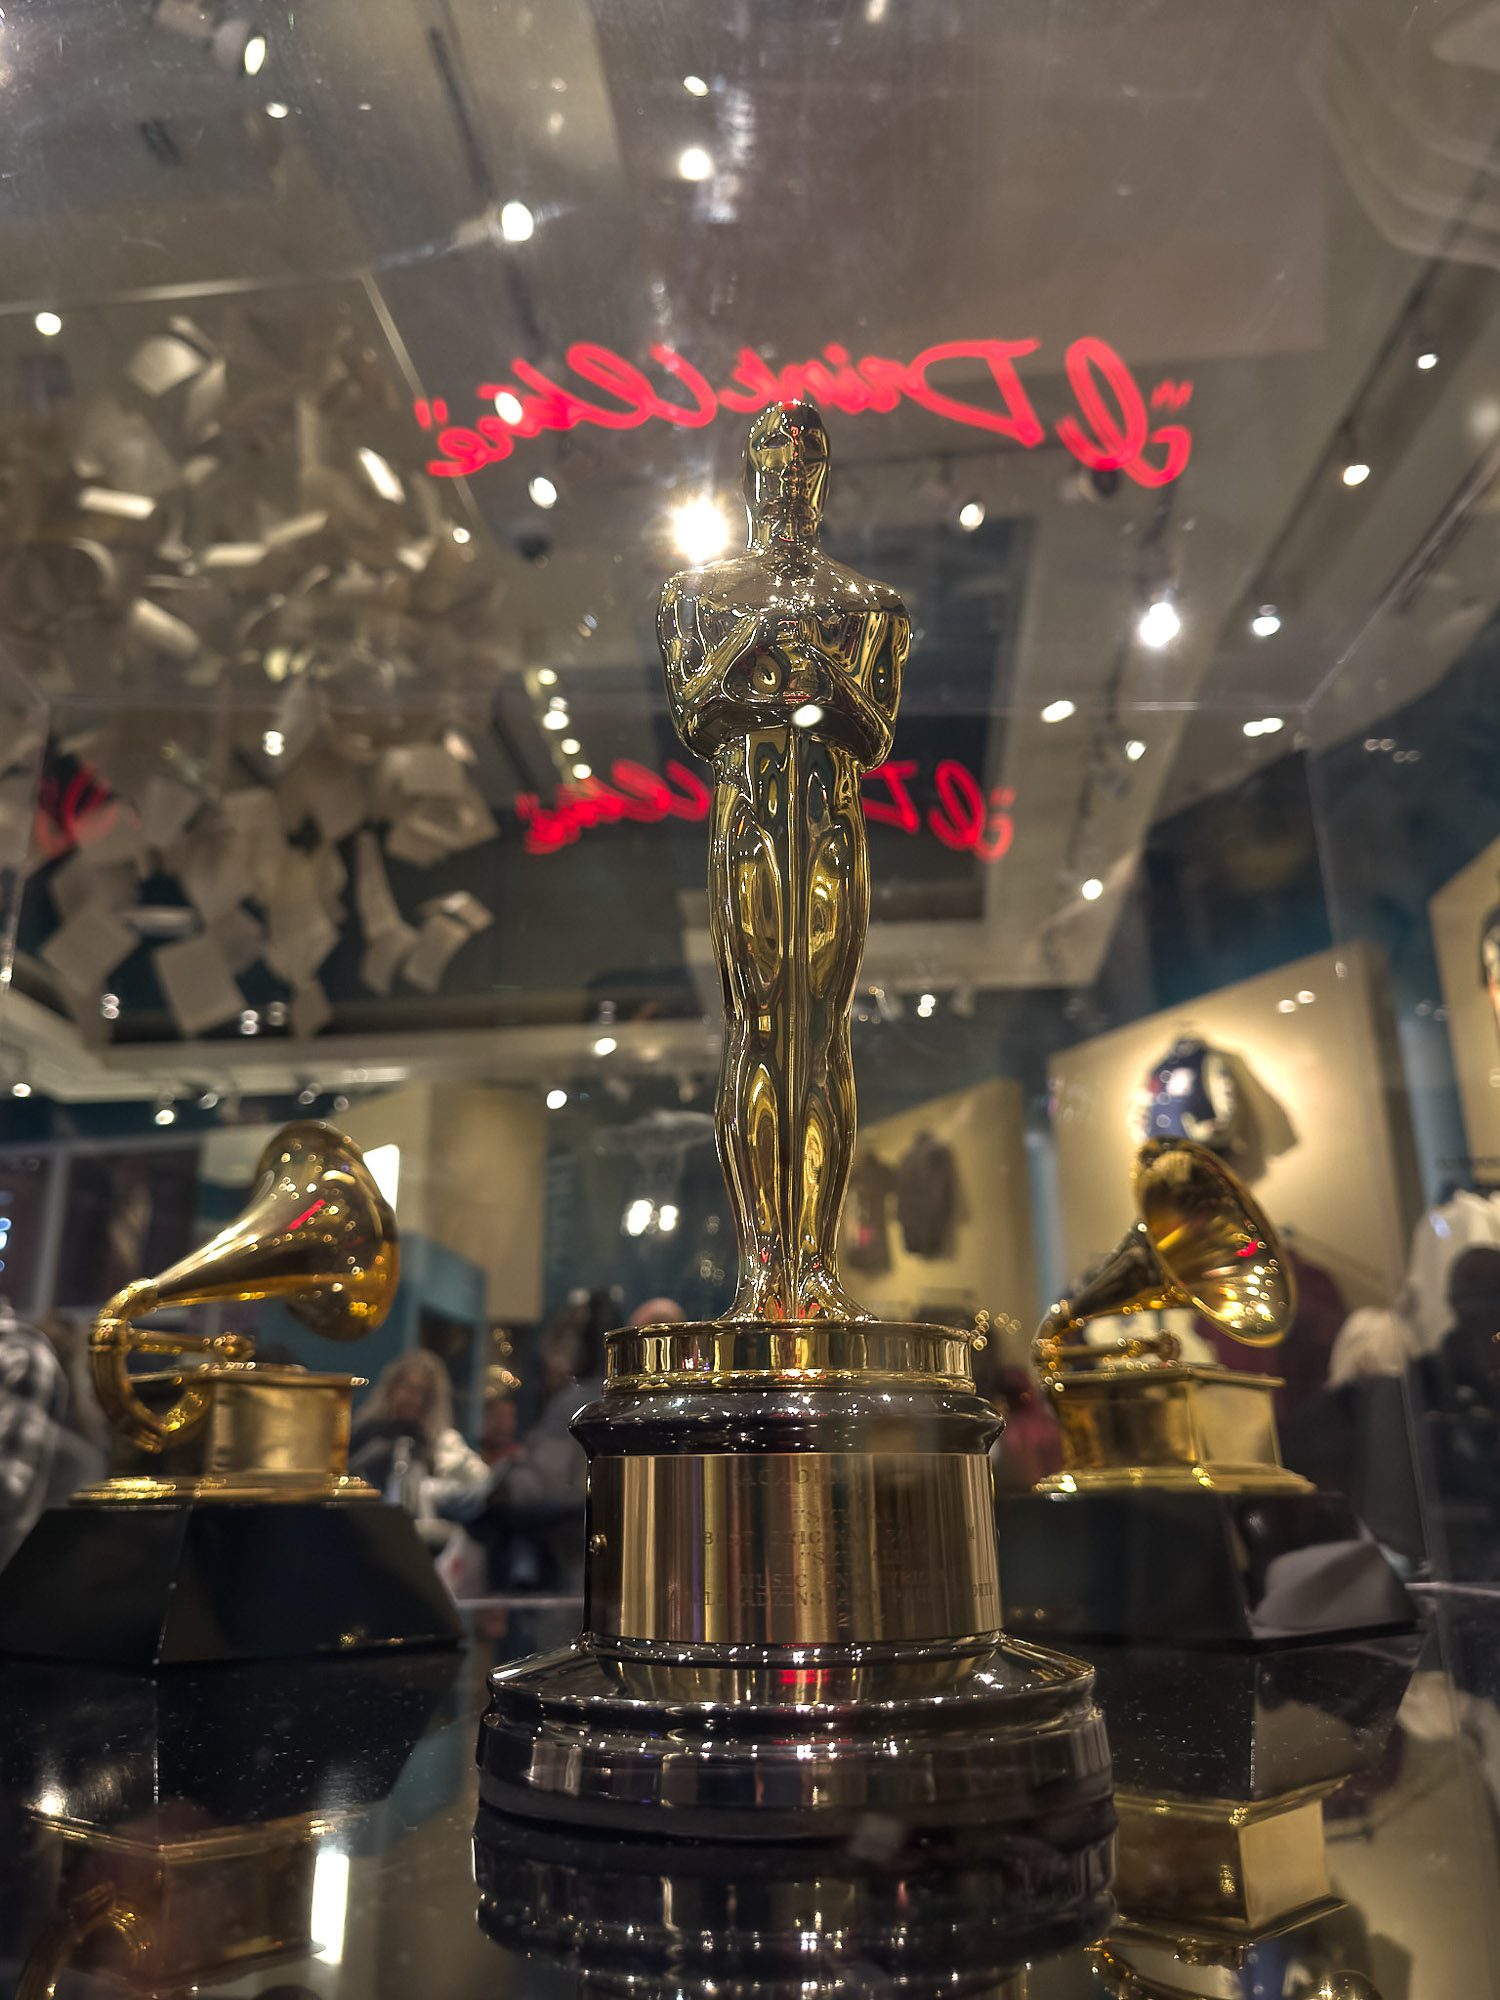 Adele's Oscar Statue for Skyfall from 2012 Academy Awards. Two Grammys are in the background. 